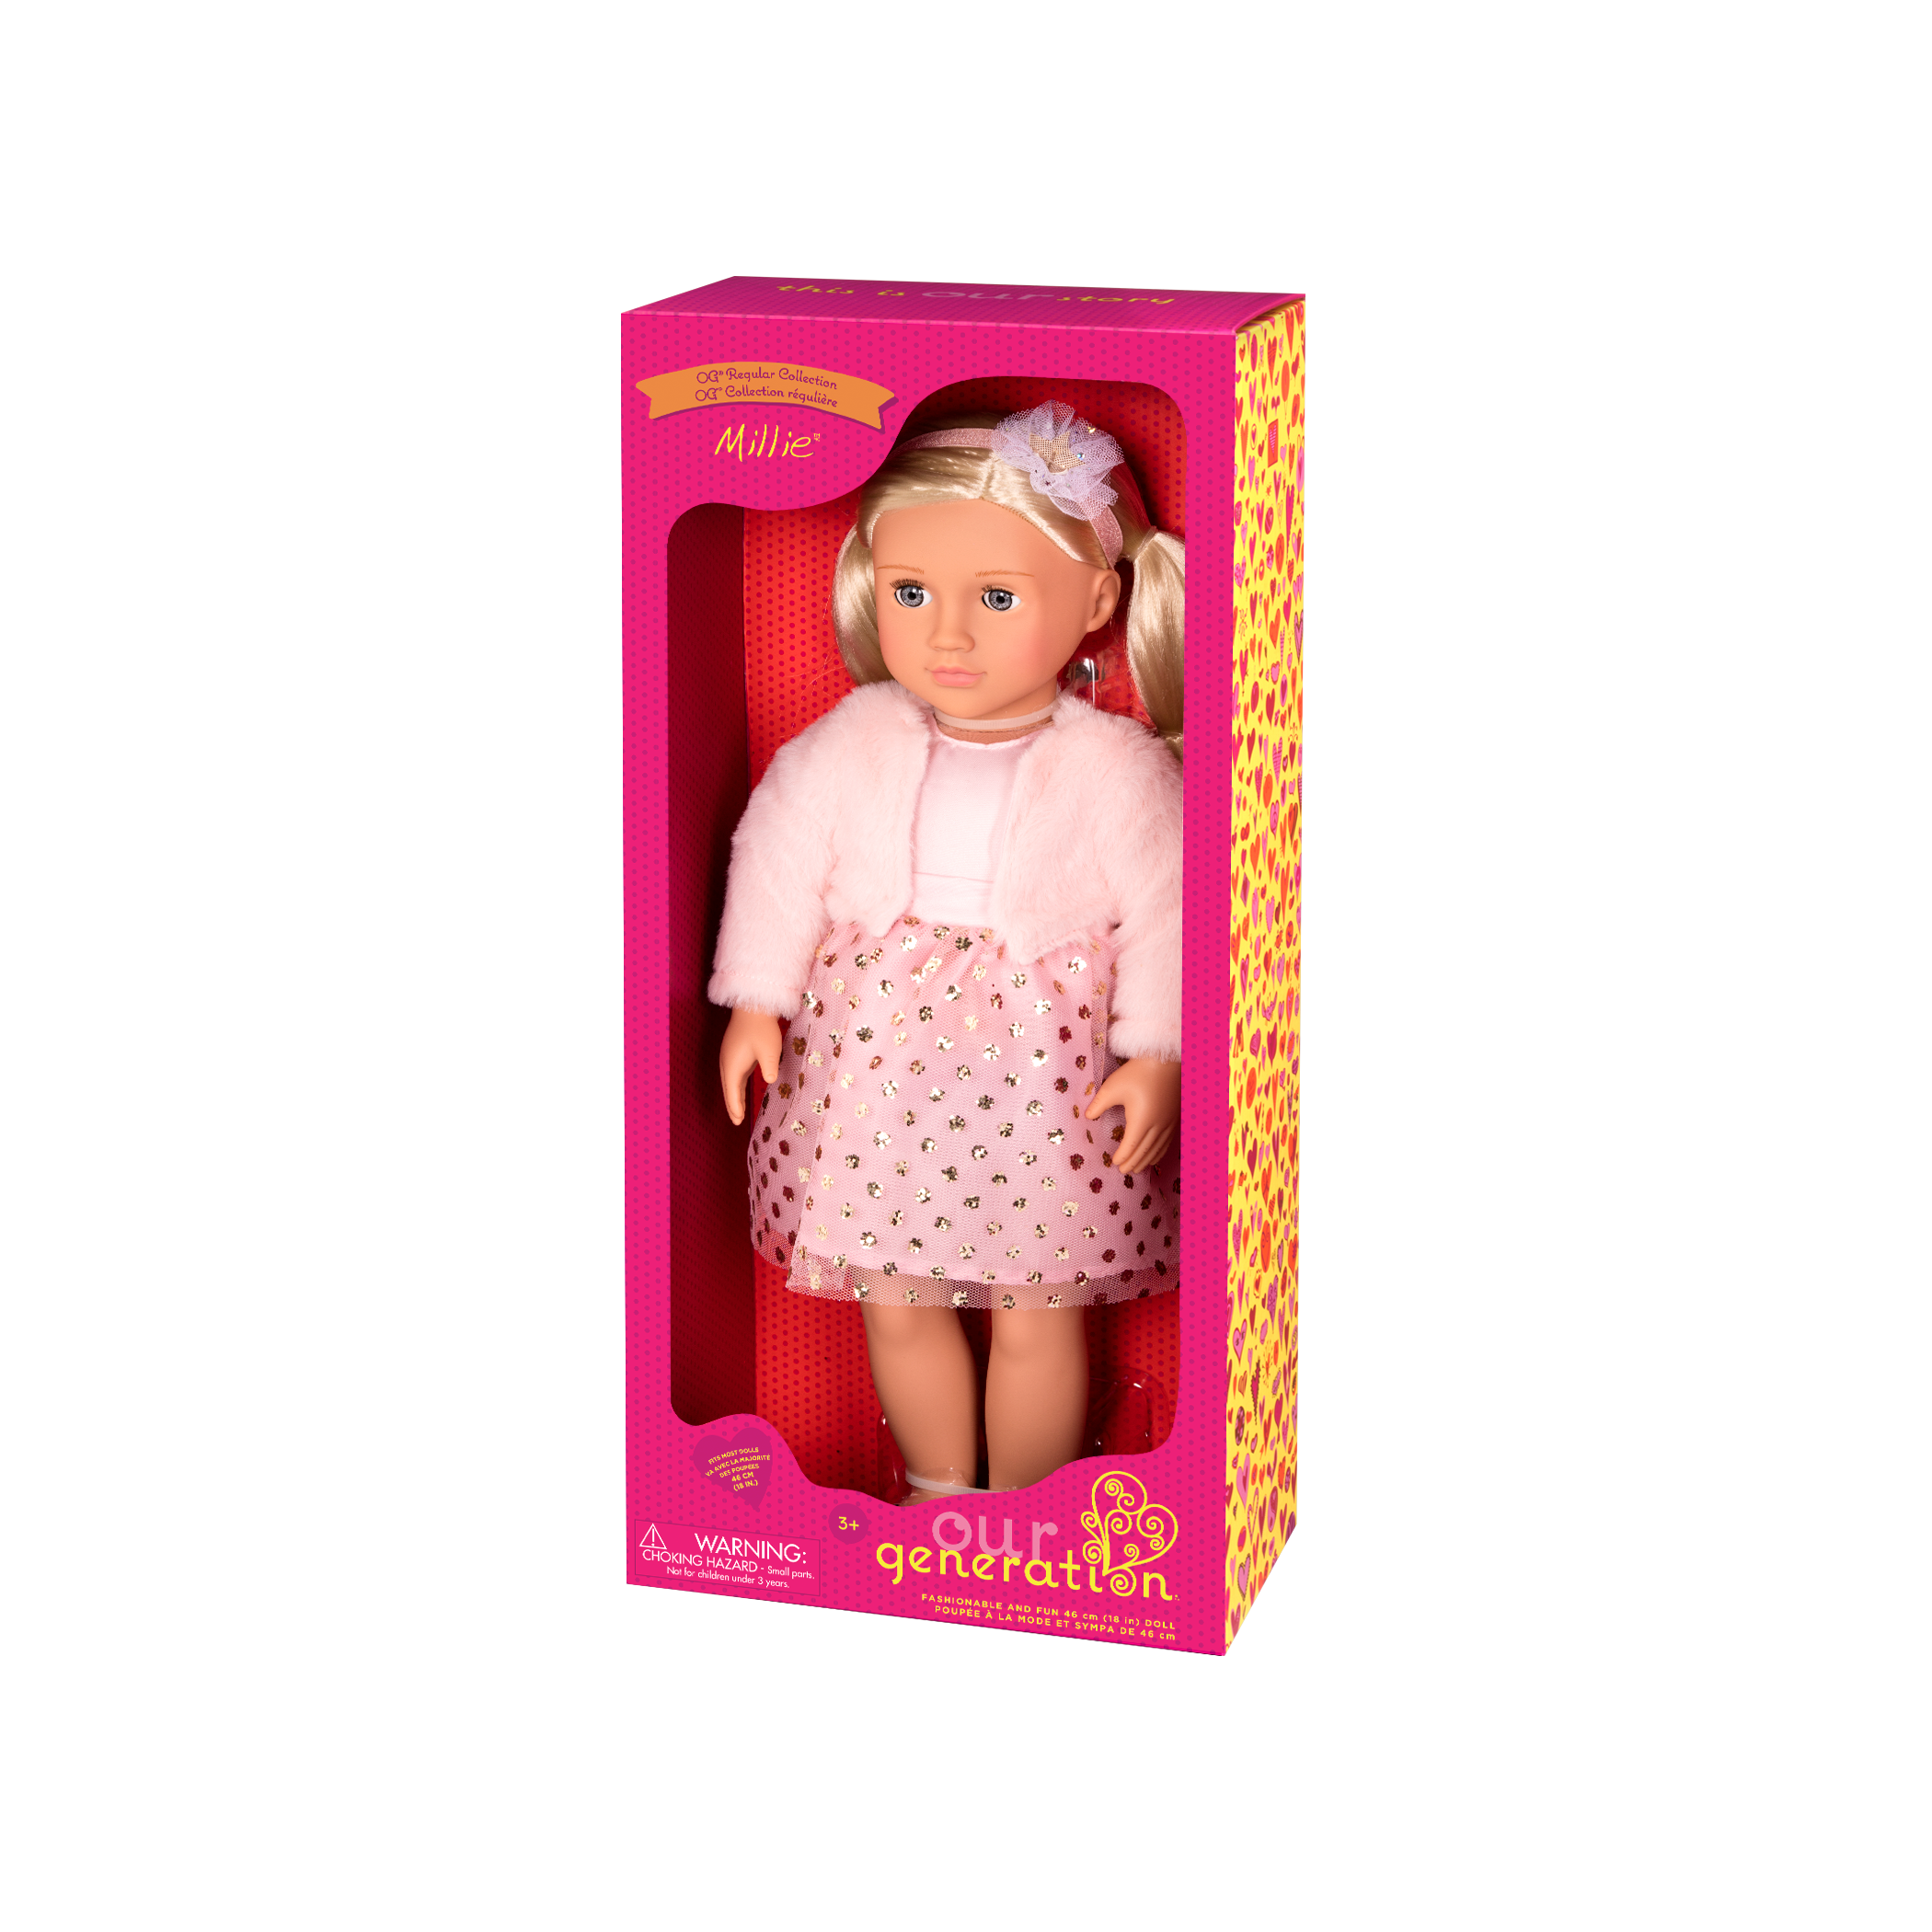 18-inch doll with blonde hair and gray-blue eyes